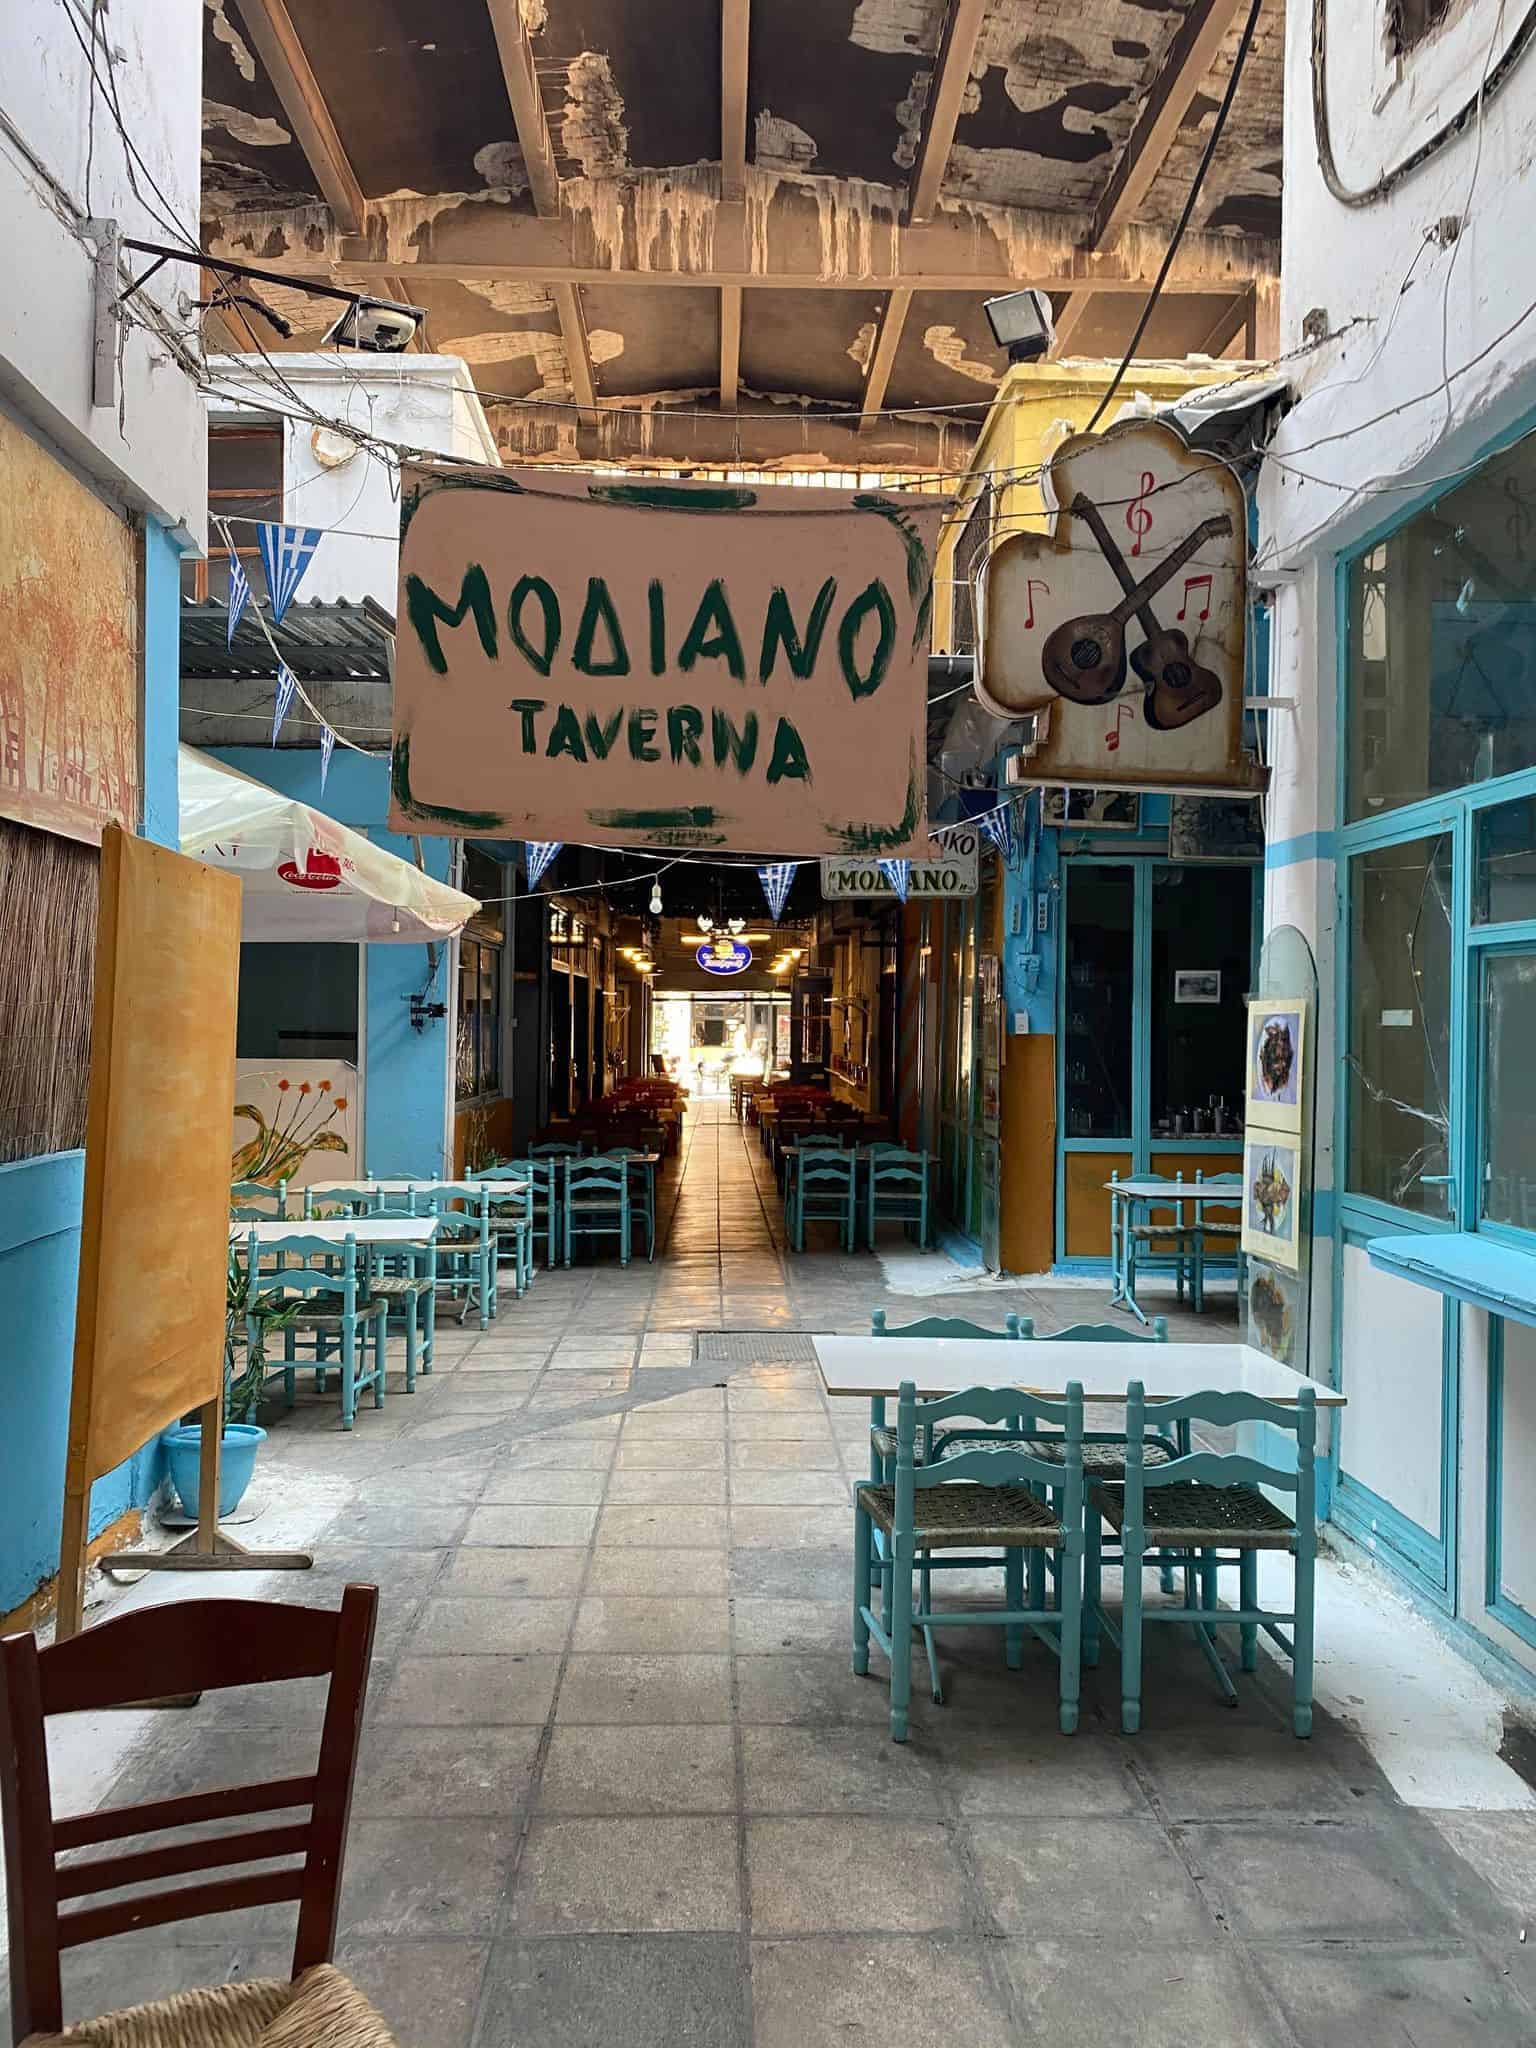 Travelling to Greece on a budget: Modiano Market, Thessaloniki